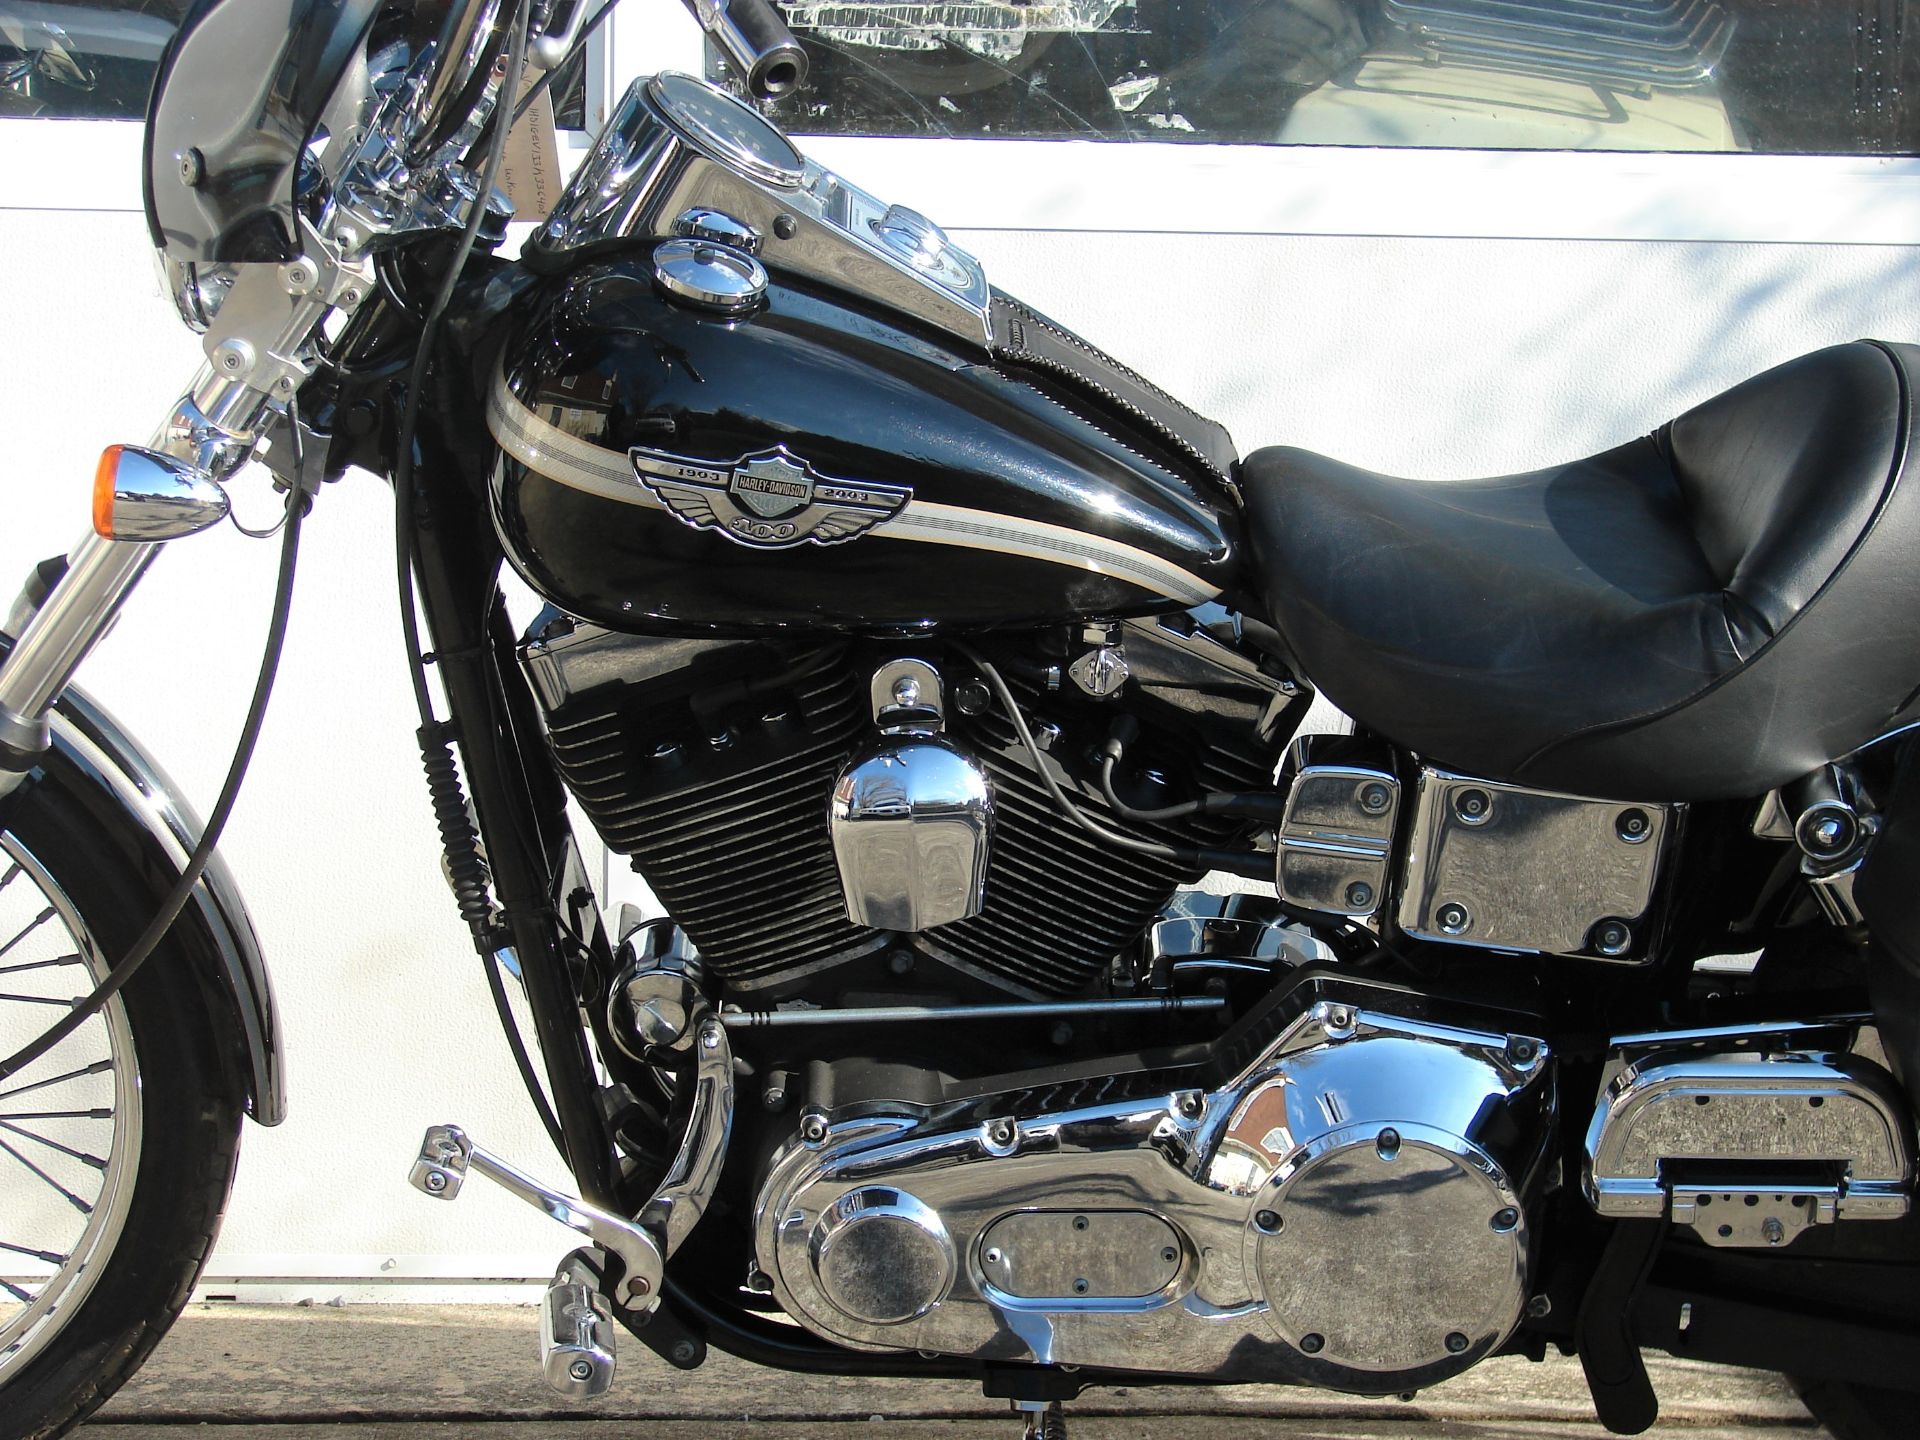 2003 Harley-Davidson FXDWG Dyna Wide Glide in Williamstown, New Jersey - Photo 15